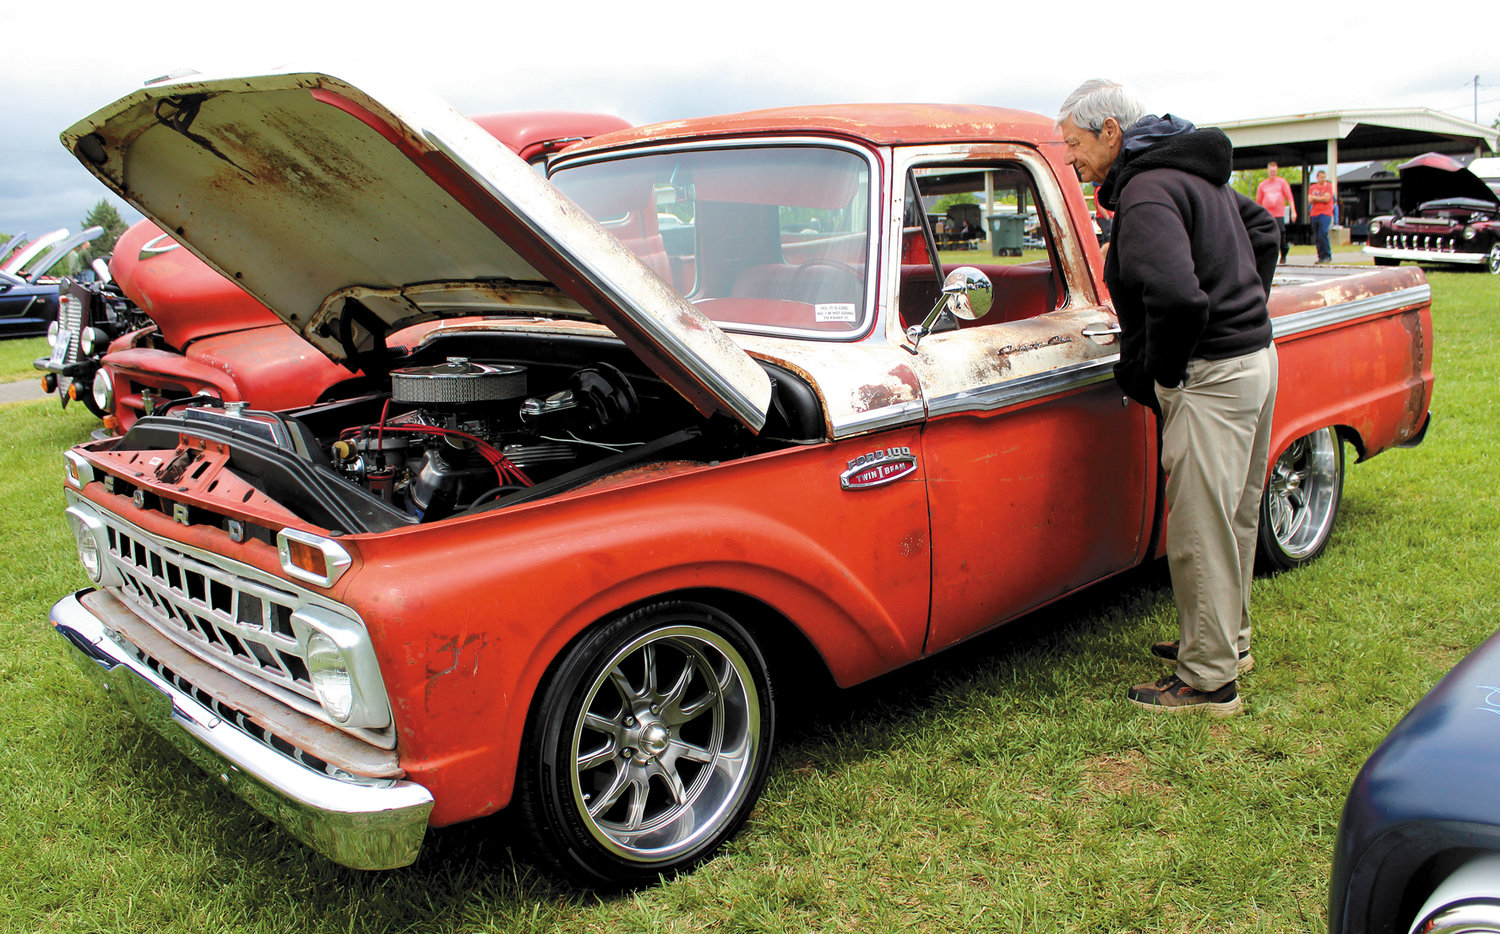 Morris Helton looks over a mid-1960sFord pickup. Helton was displaying a 1980sOldsmobile and also owns a 1957 Ford Fairlane